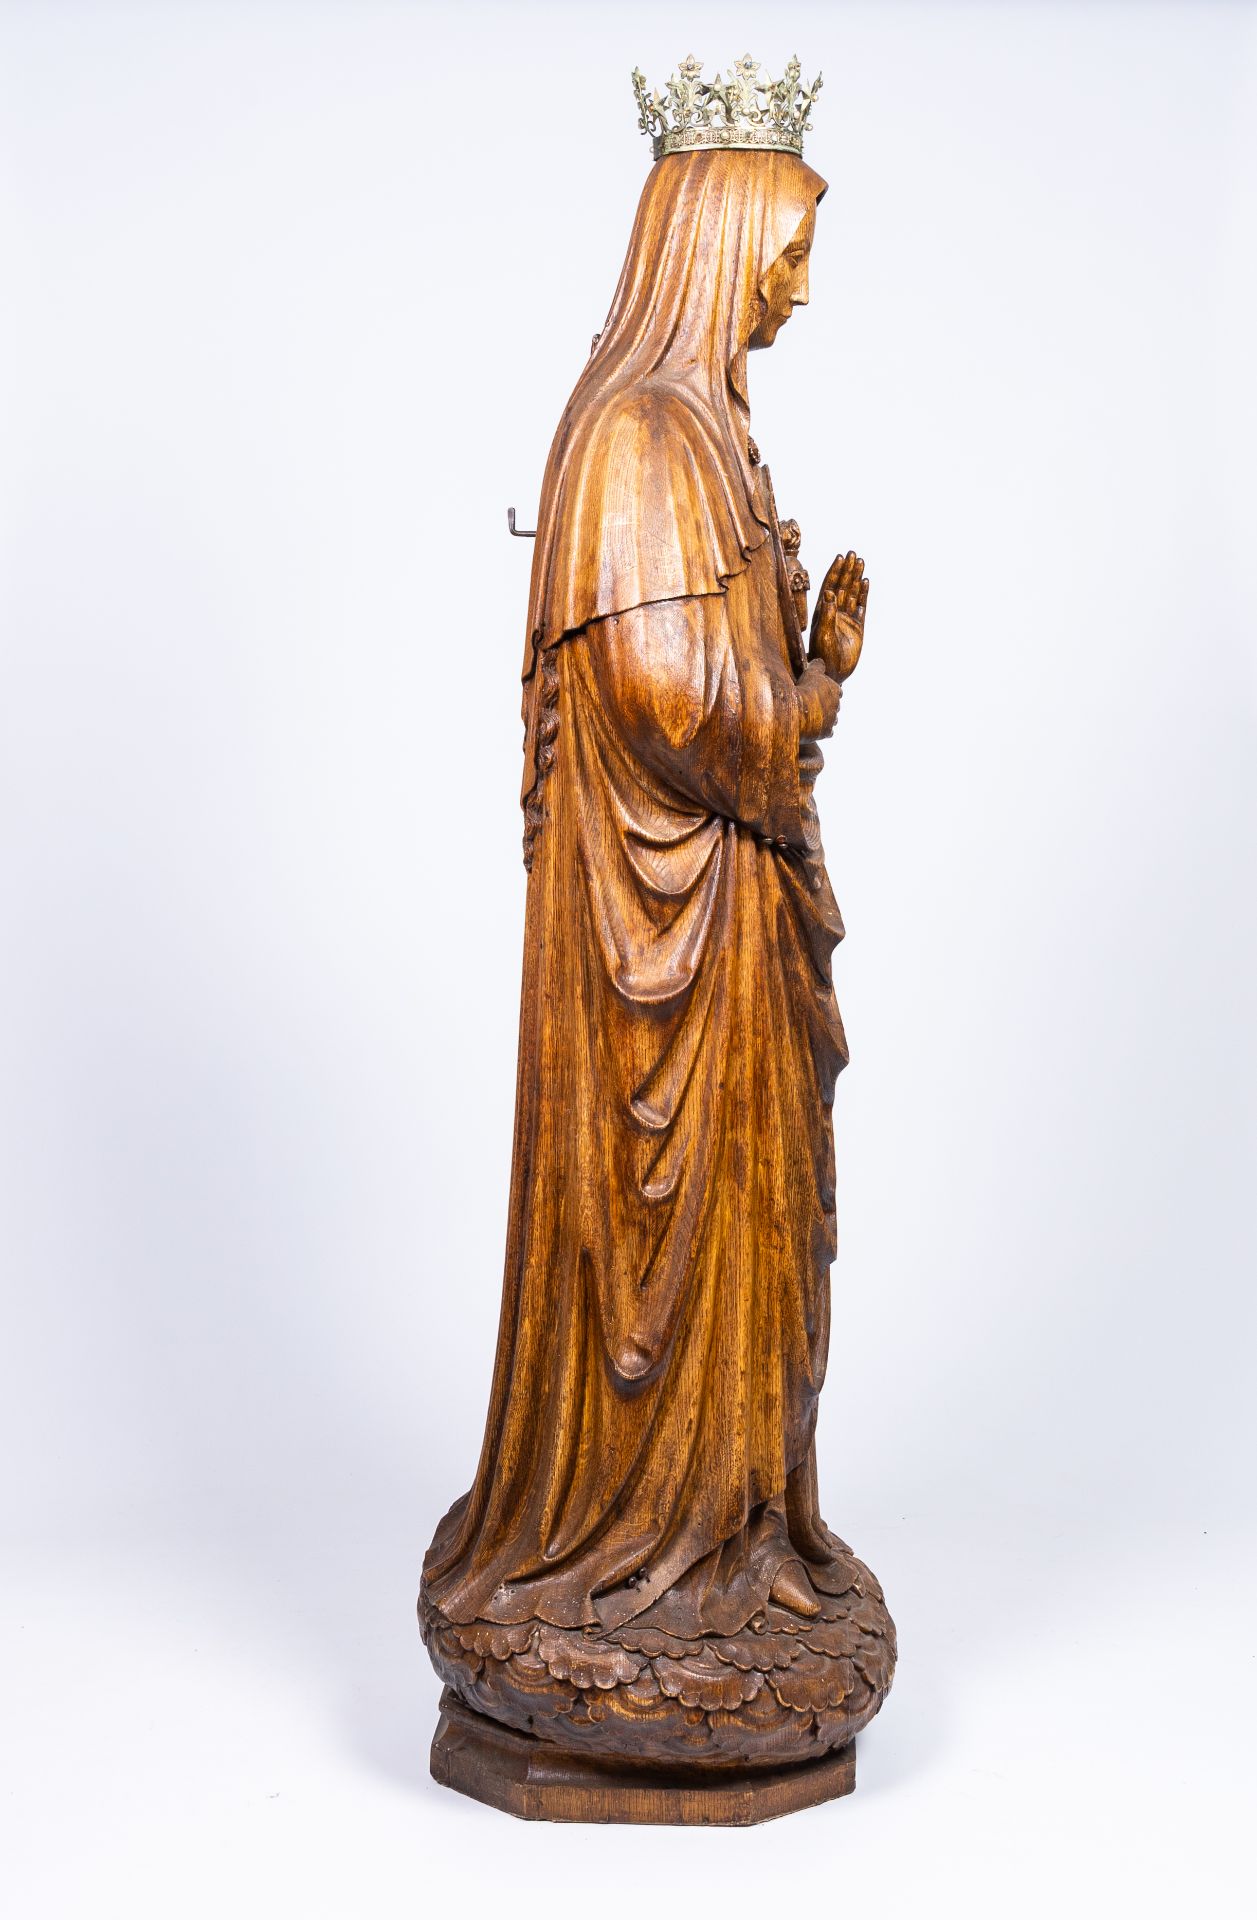 Belgian school, monogrammed D.B or C.B.: The Immaculate Heart of Mary, oak wood, dated 1906 - Image 4 of 13